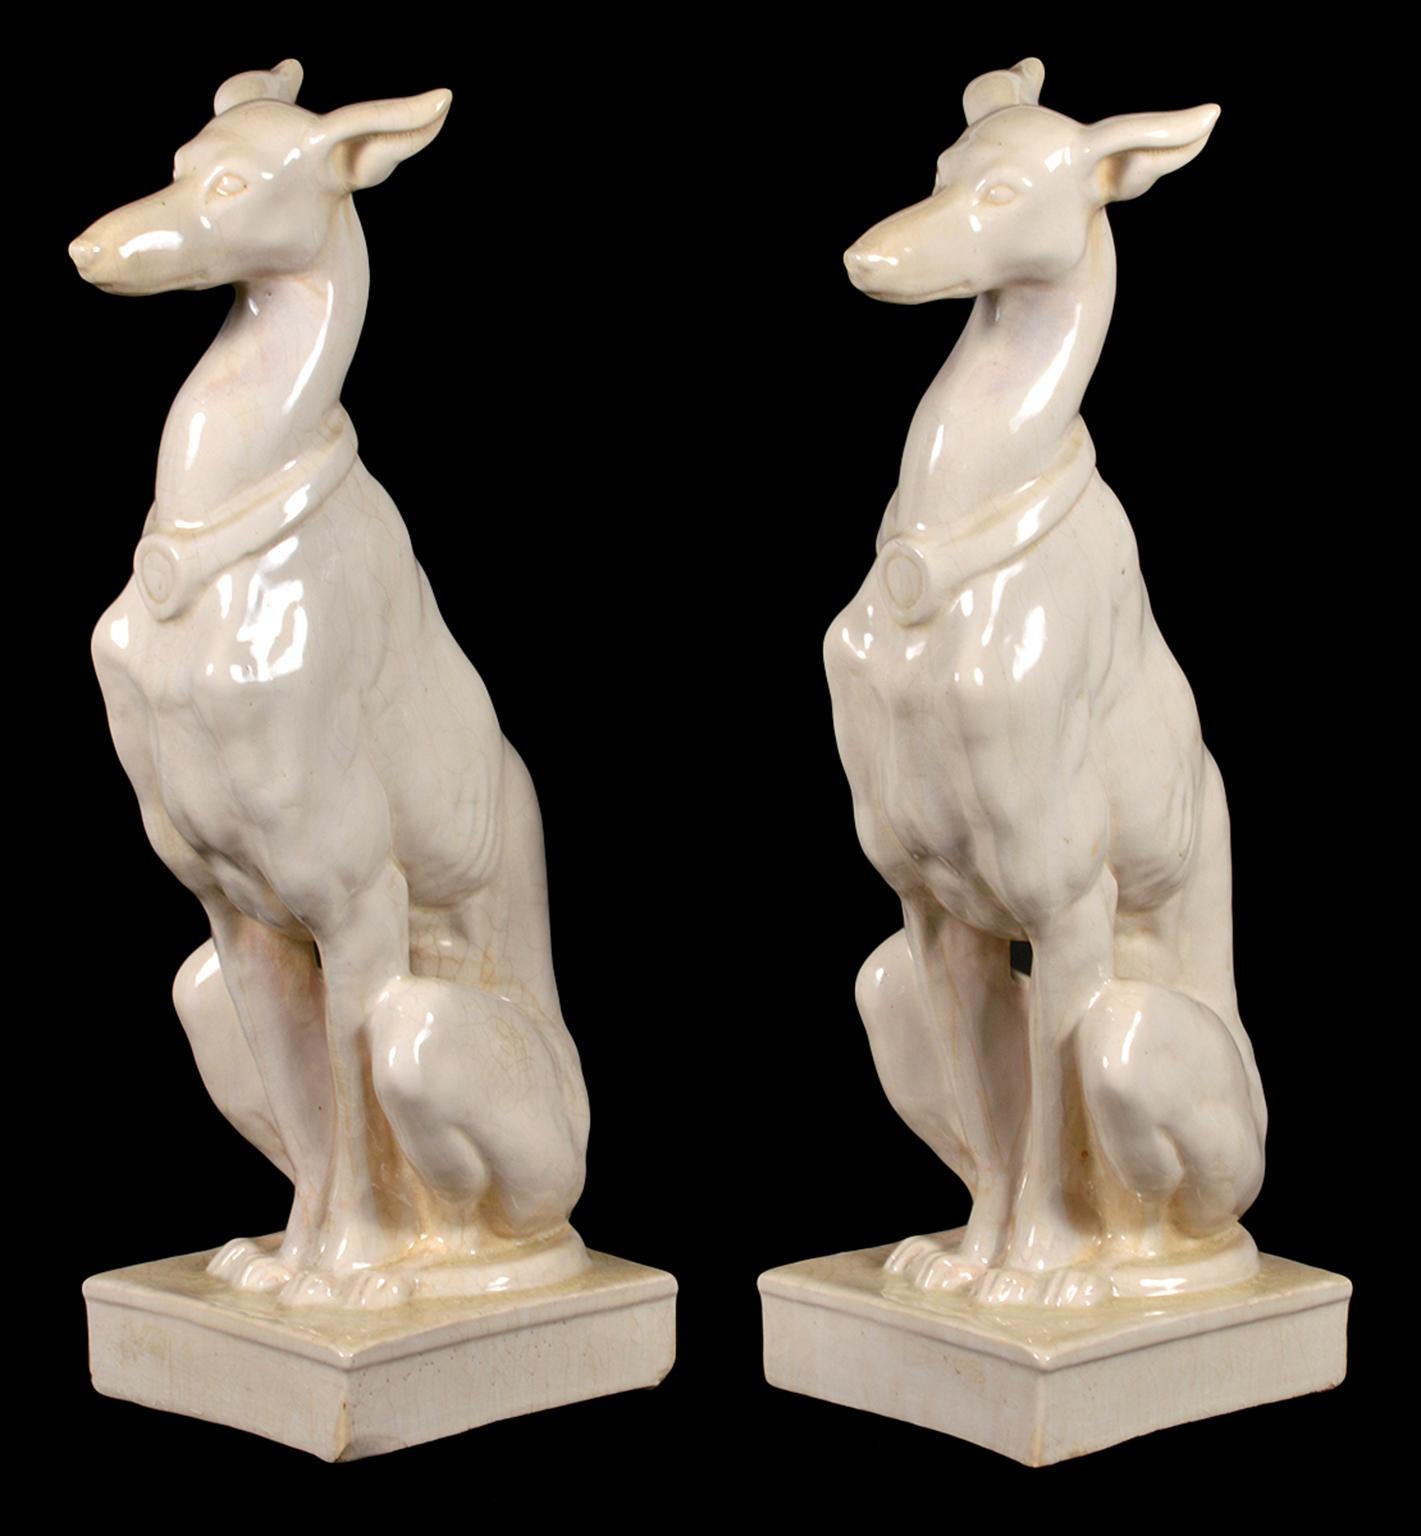 The two sitting dogs wearing collars are glazed with an off-white cracle glaze that compliments their graceful posture.